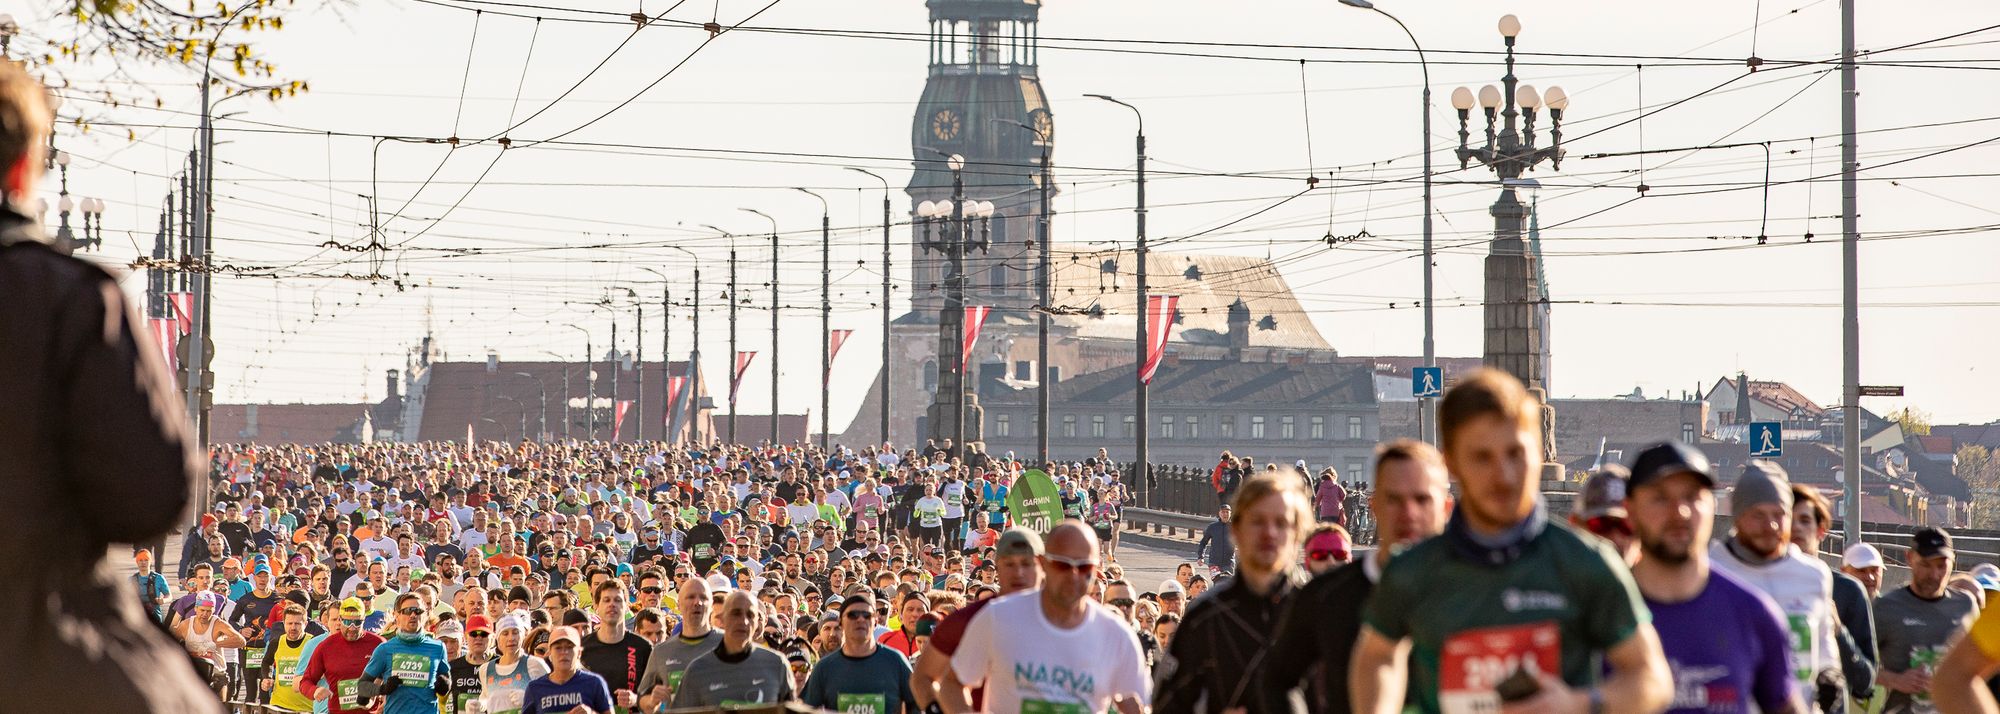 23751 runners from 79 countries experience the actual World Champs courses during Rimi Riga Marathon!